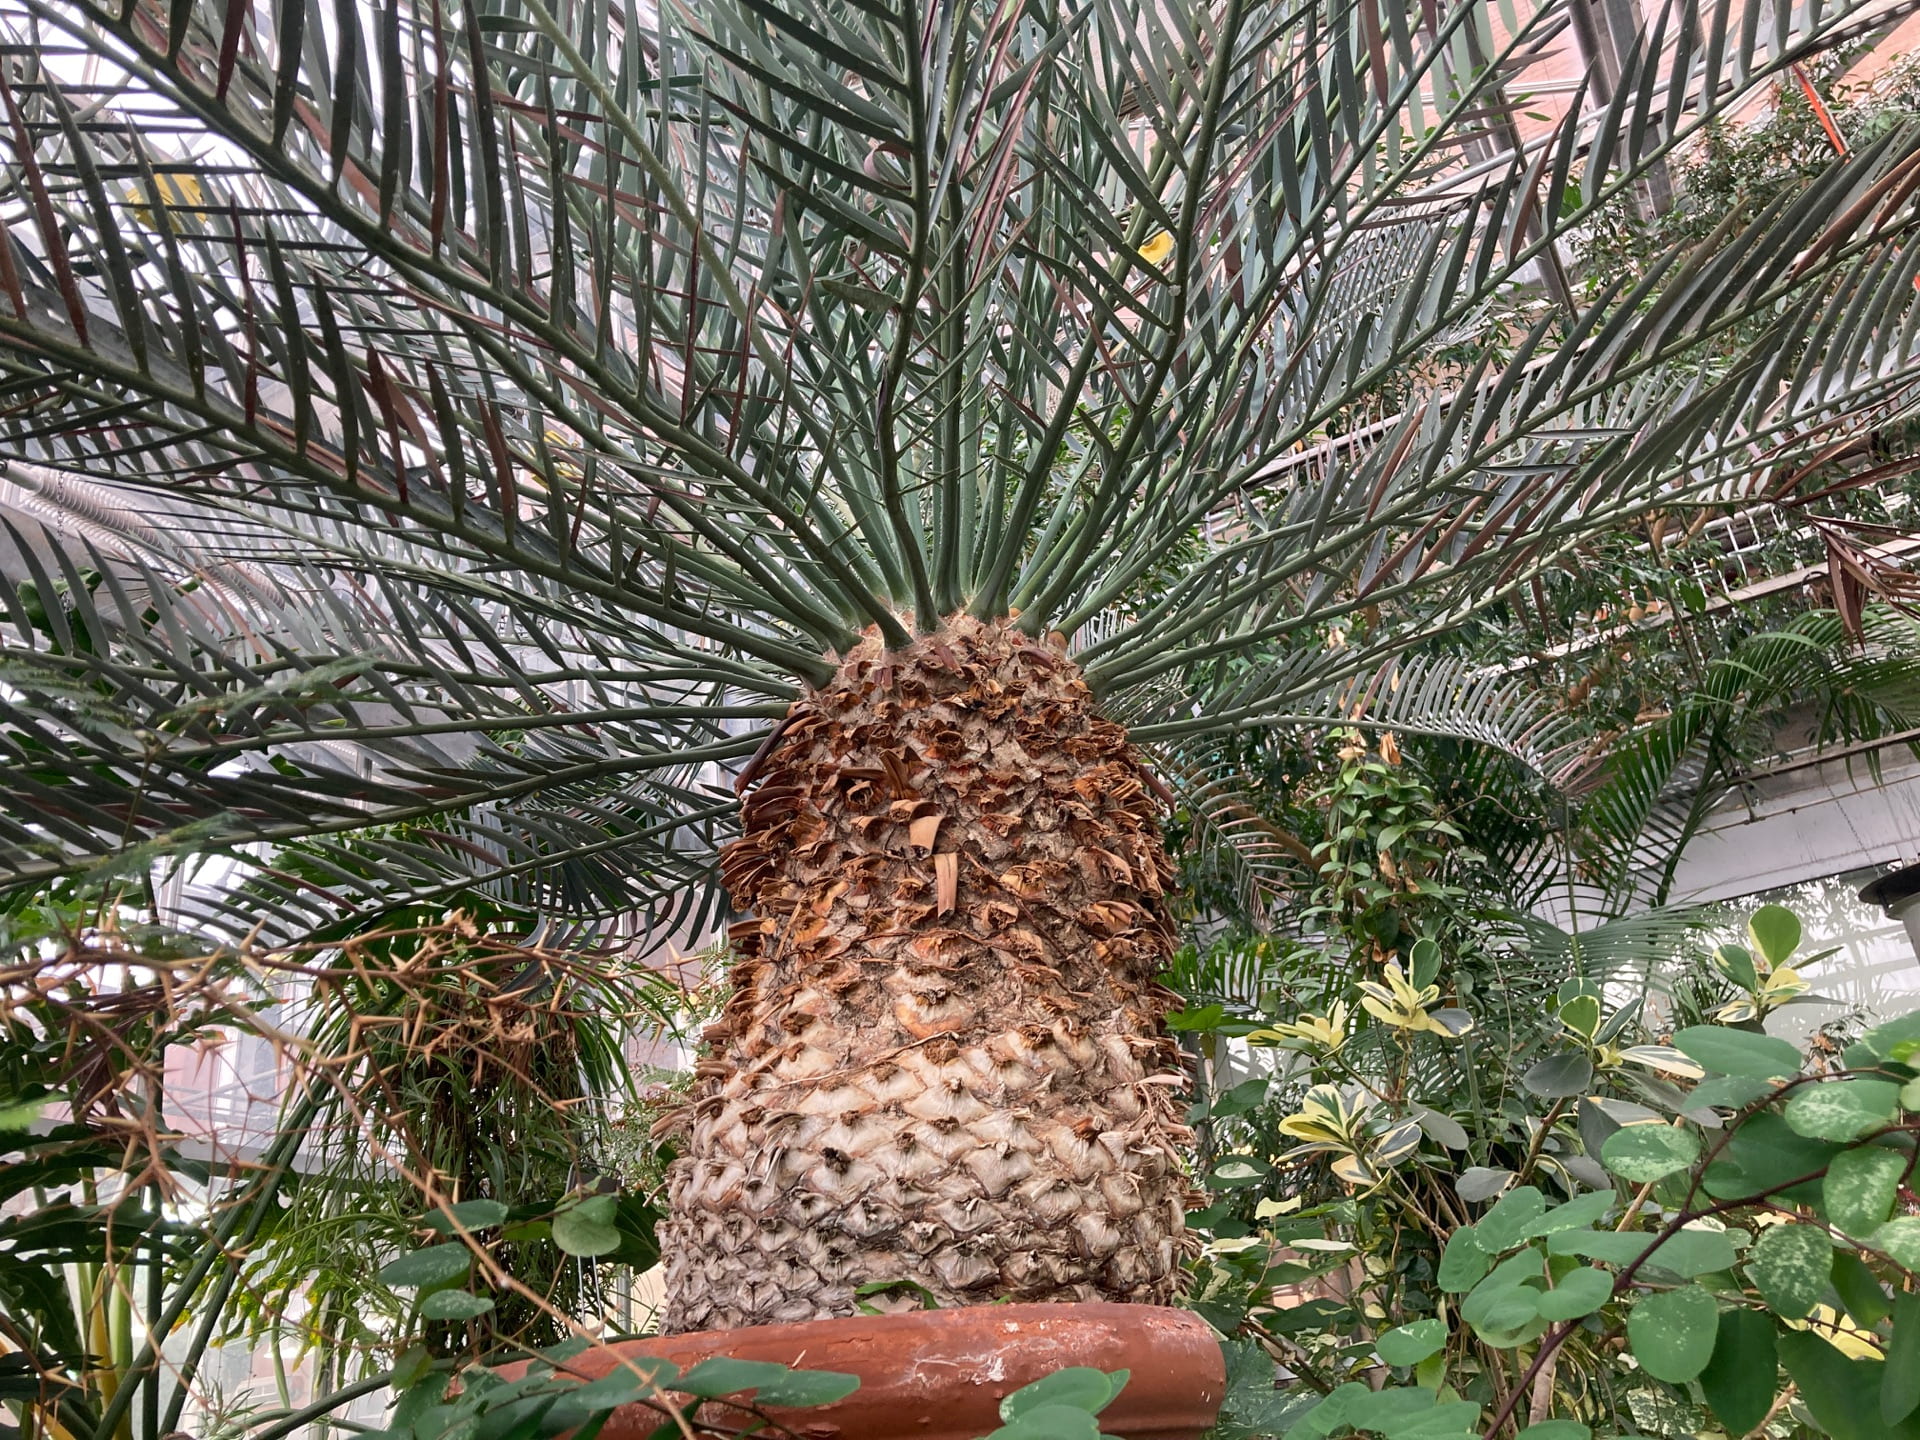 Our Karoo cycad, Encephalartos lehmannii, is the oldest plant in the greenhouse, over 100 years. It is a gymnosperm, producing a naked seed.